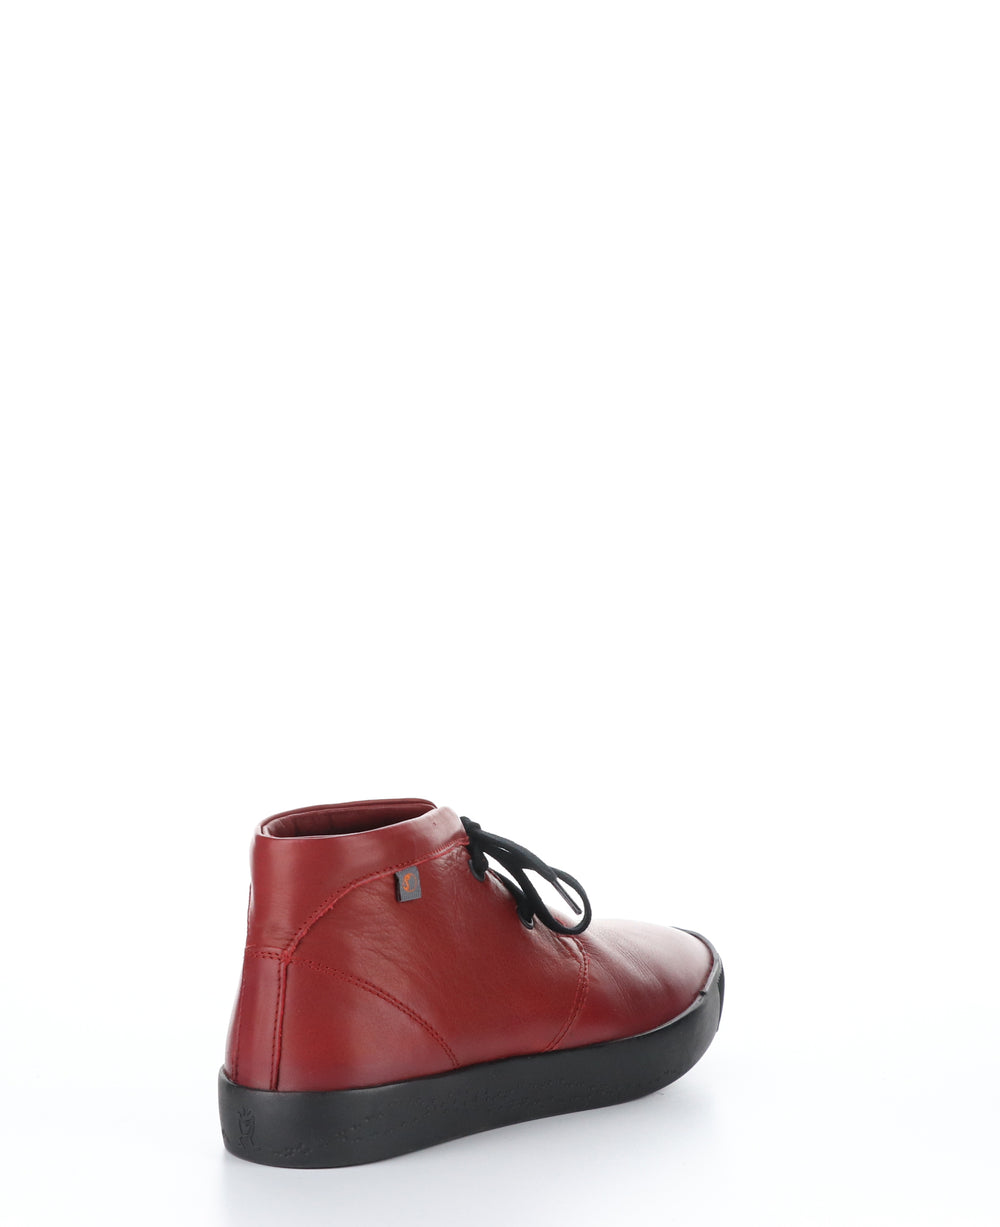 SIAL607SOF Red Round Toe Shoes|SIAL607SOF Chaussures à Bout Rond in Rouge